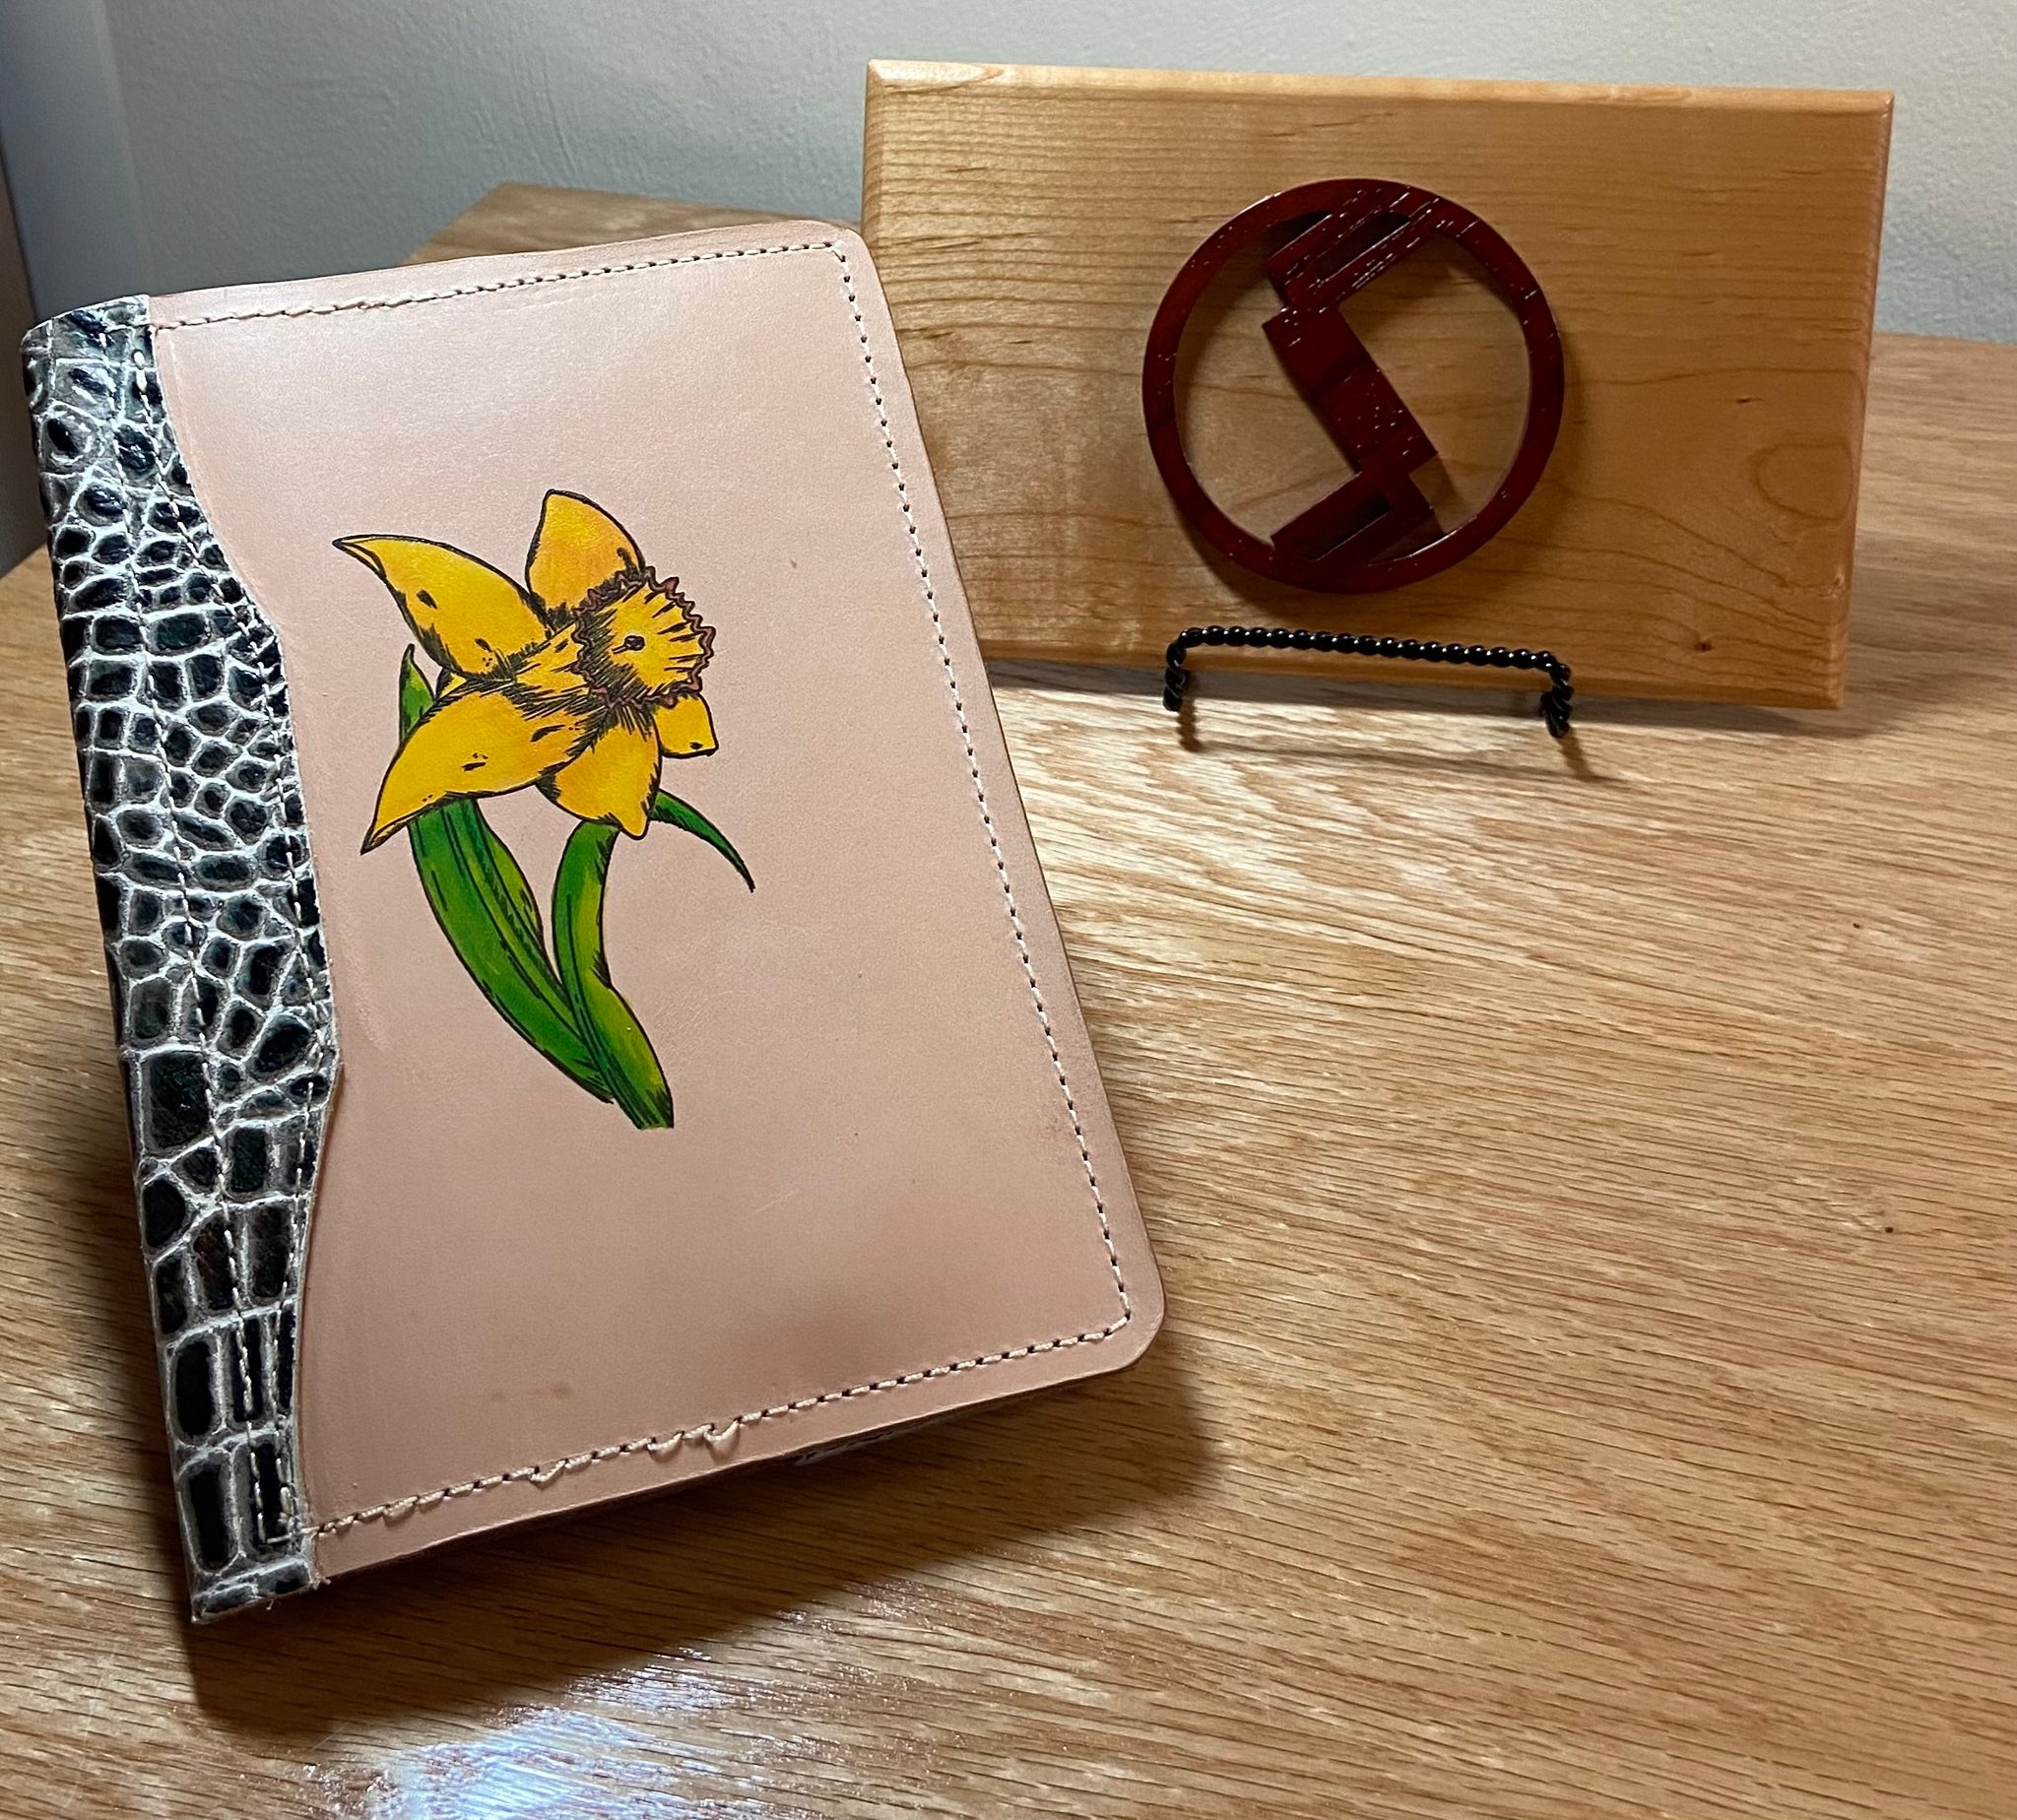 Leather Field Journal Hand Painted Cover - Fabulous Fisher